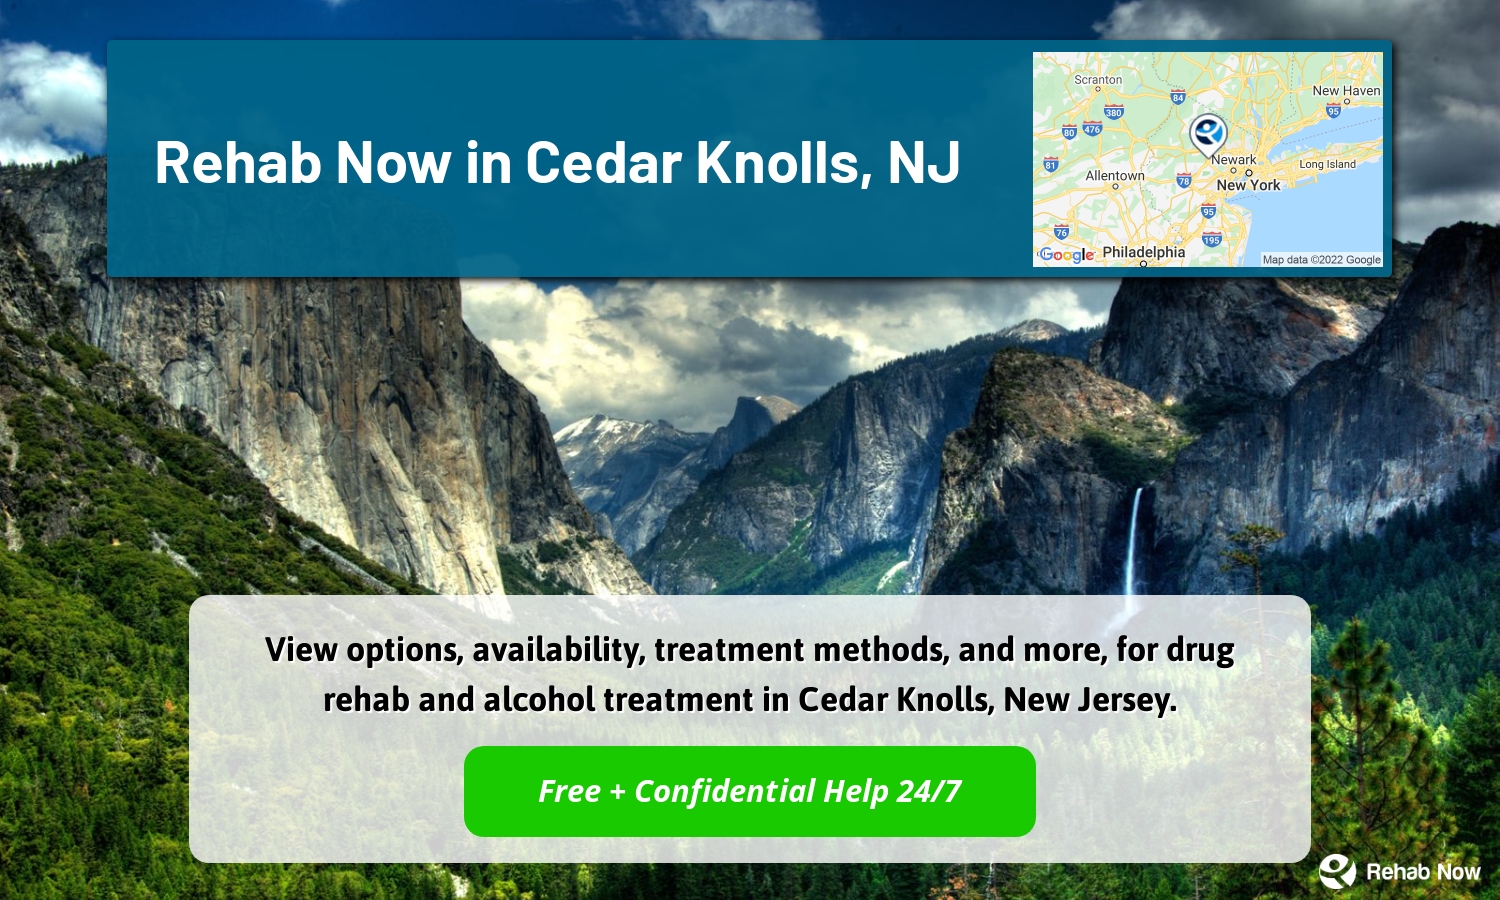 View options, availability, treatment methods, and more, for drug rehab and alcohol treatment in Cedar Knolls, New Jersey.